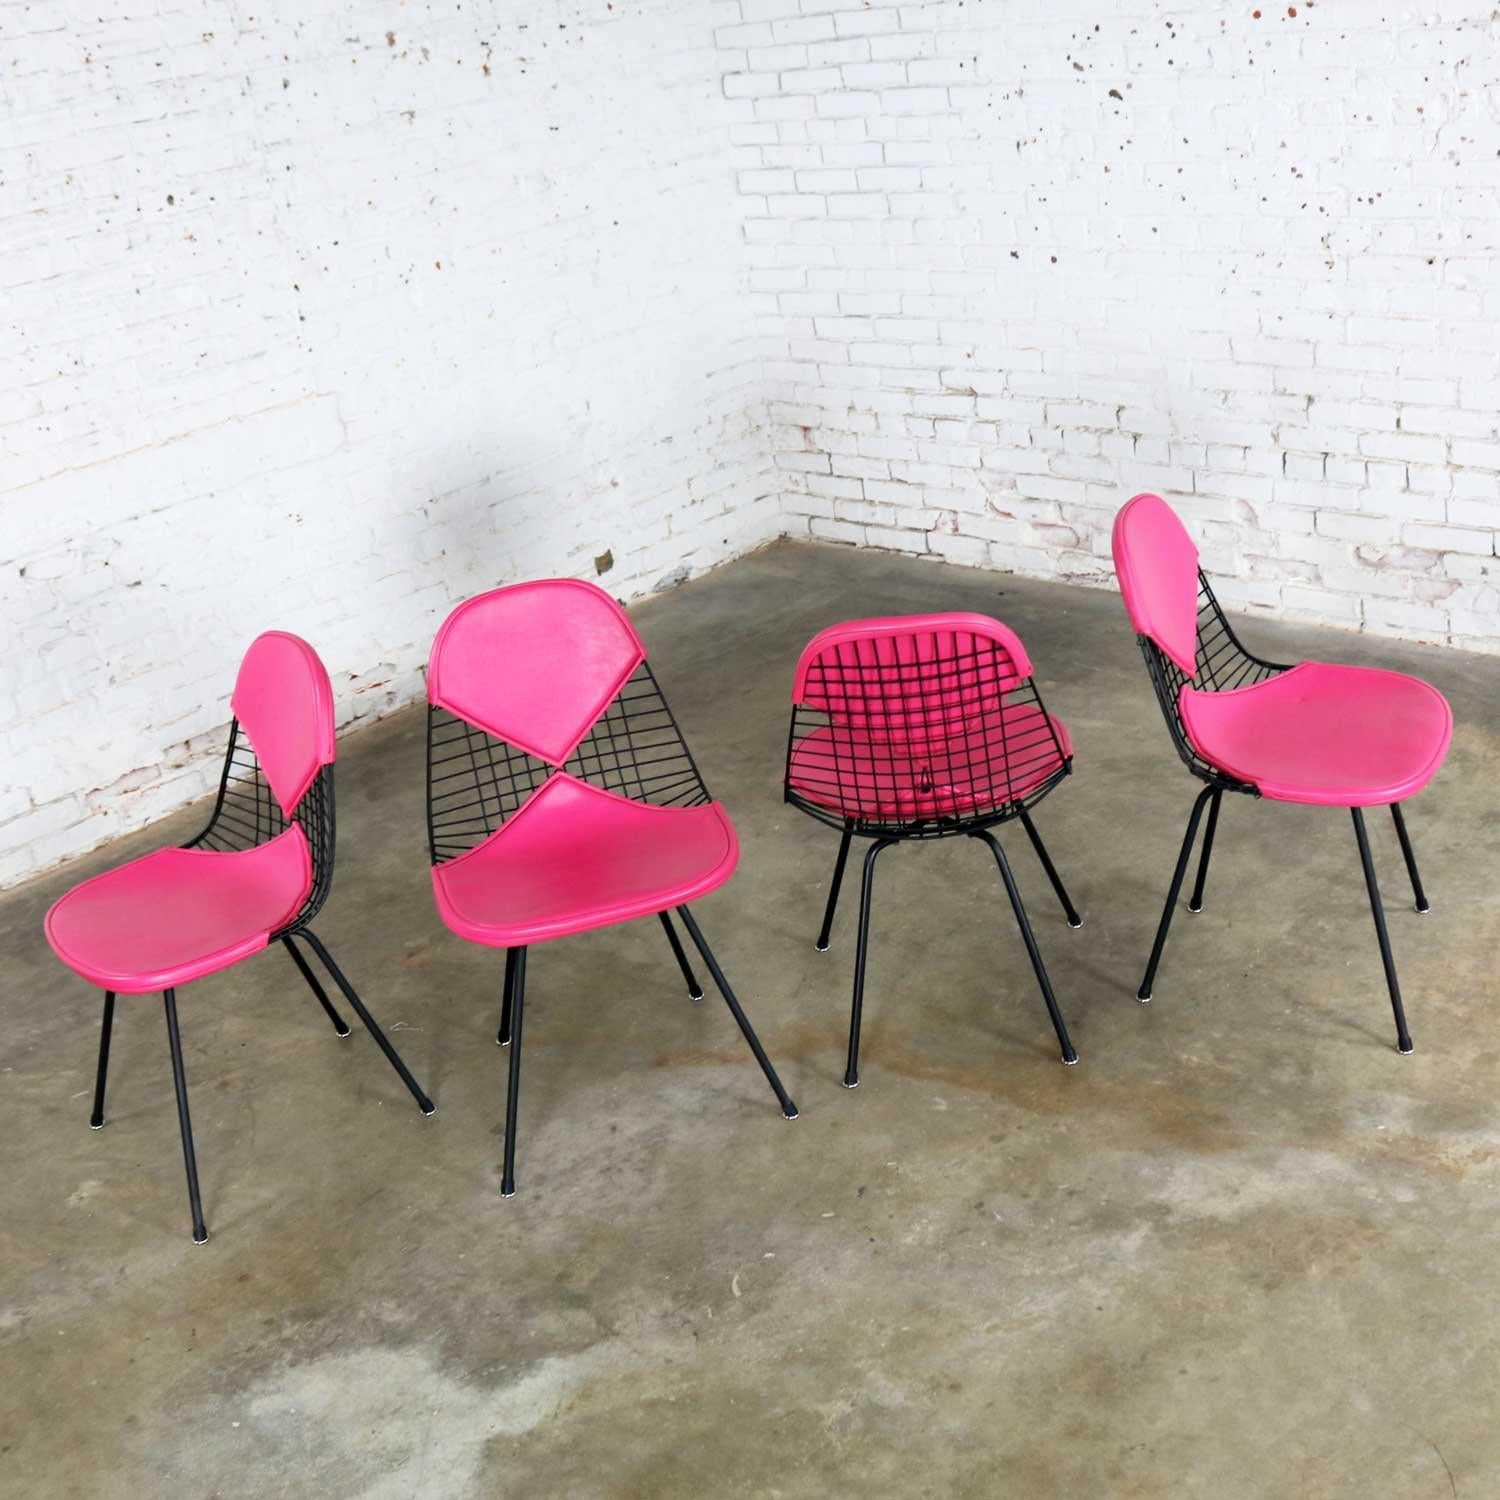 Fabulous set of four DKX-2 wire bikini shell chairs on X bases with Hot Pink Naugahyde bikini covers designed by Charles and Ray Eames for Herman Miller. They are in wonderful vintage restored condition overall. The chairs have had some factory weld